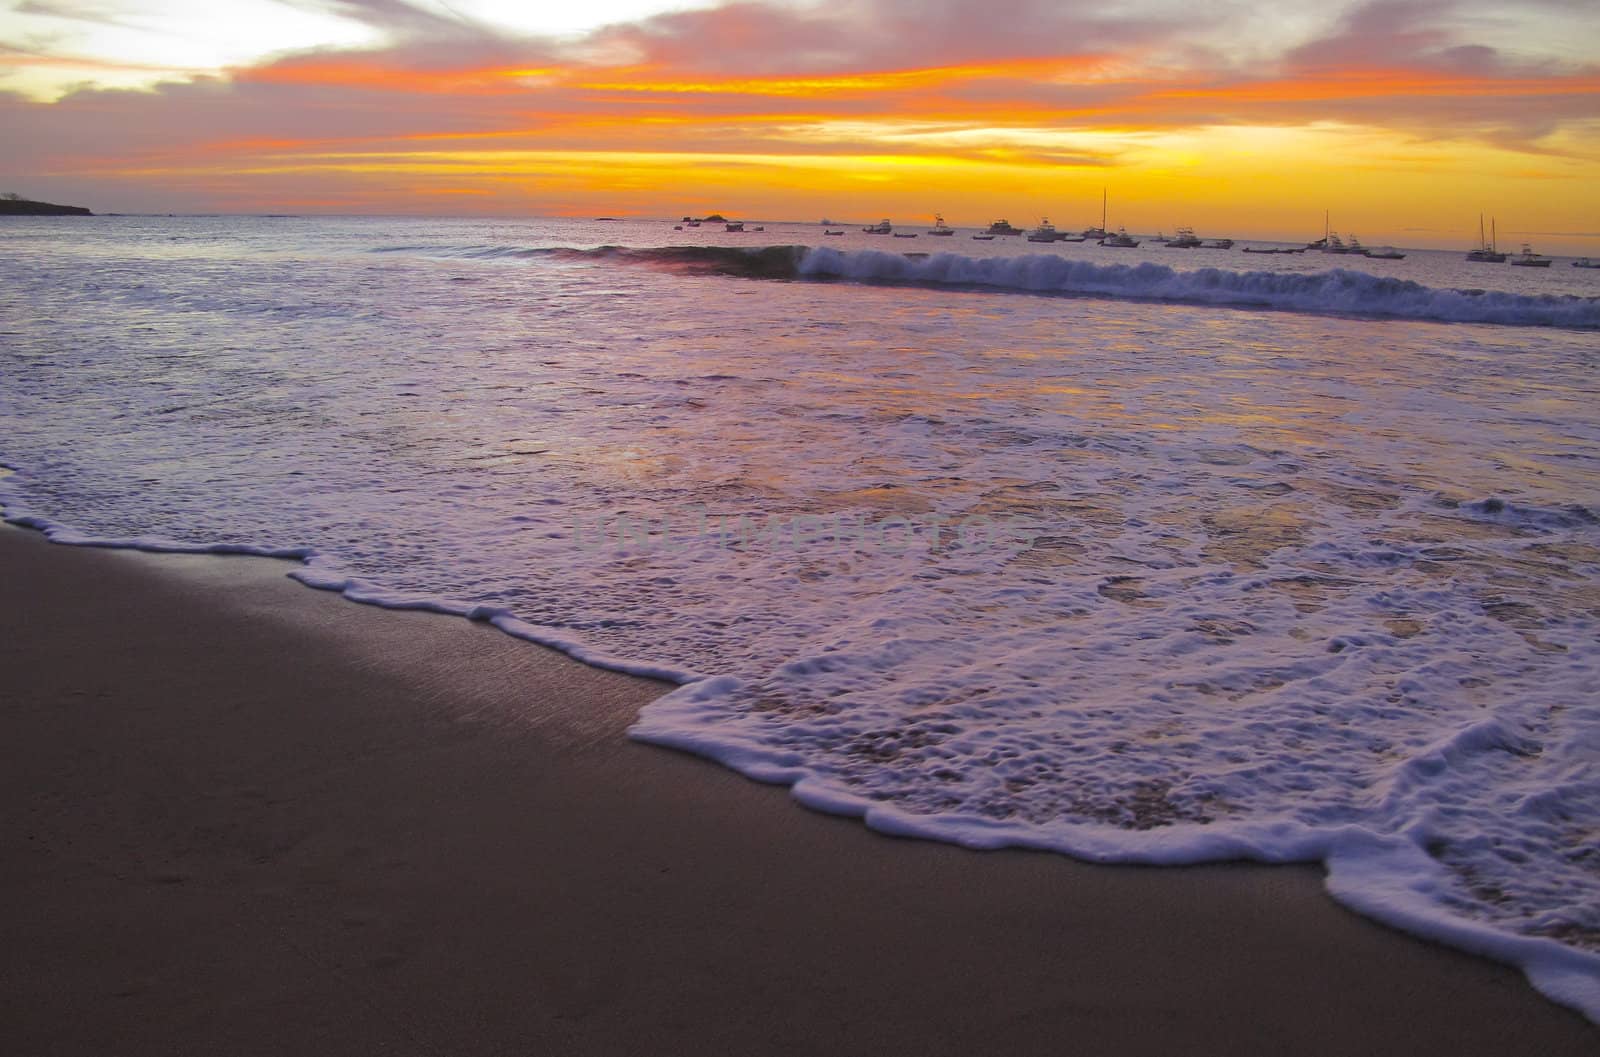 Sunset in Costa Rica.  Toned sunset image with good depth of field and slow shutter to capture the motion of the ocean